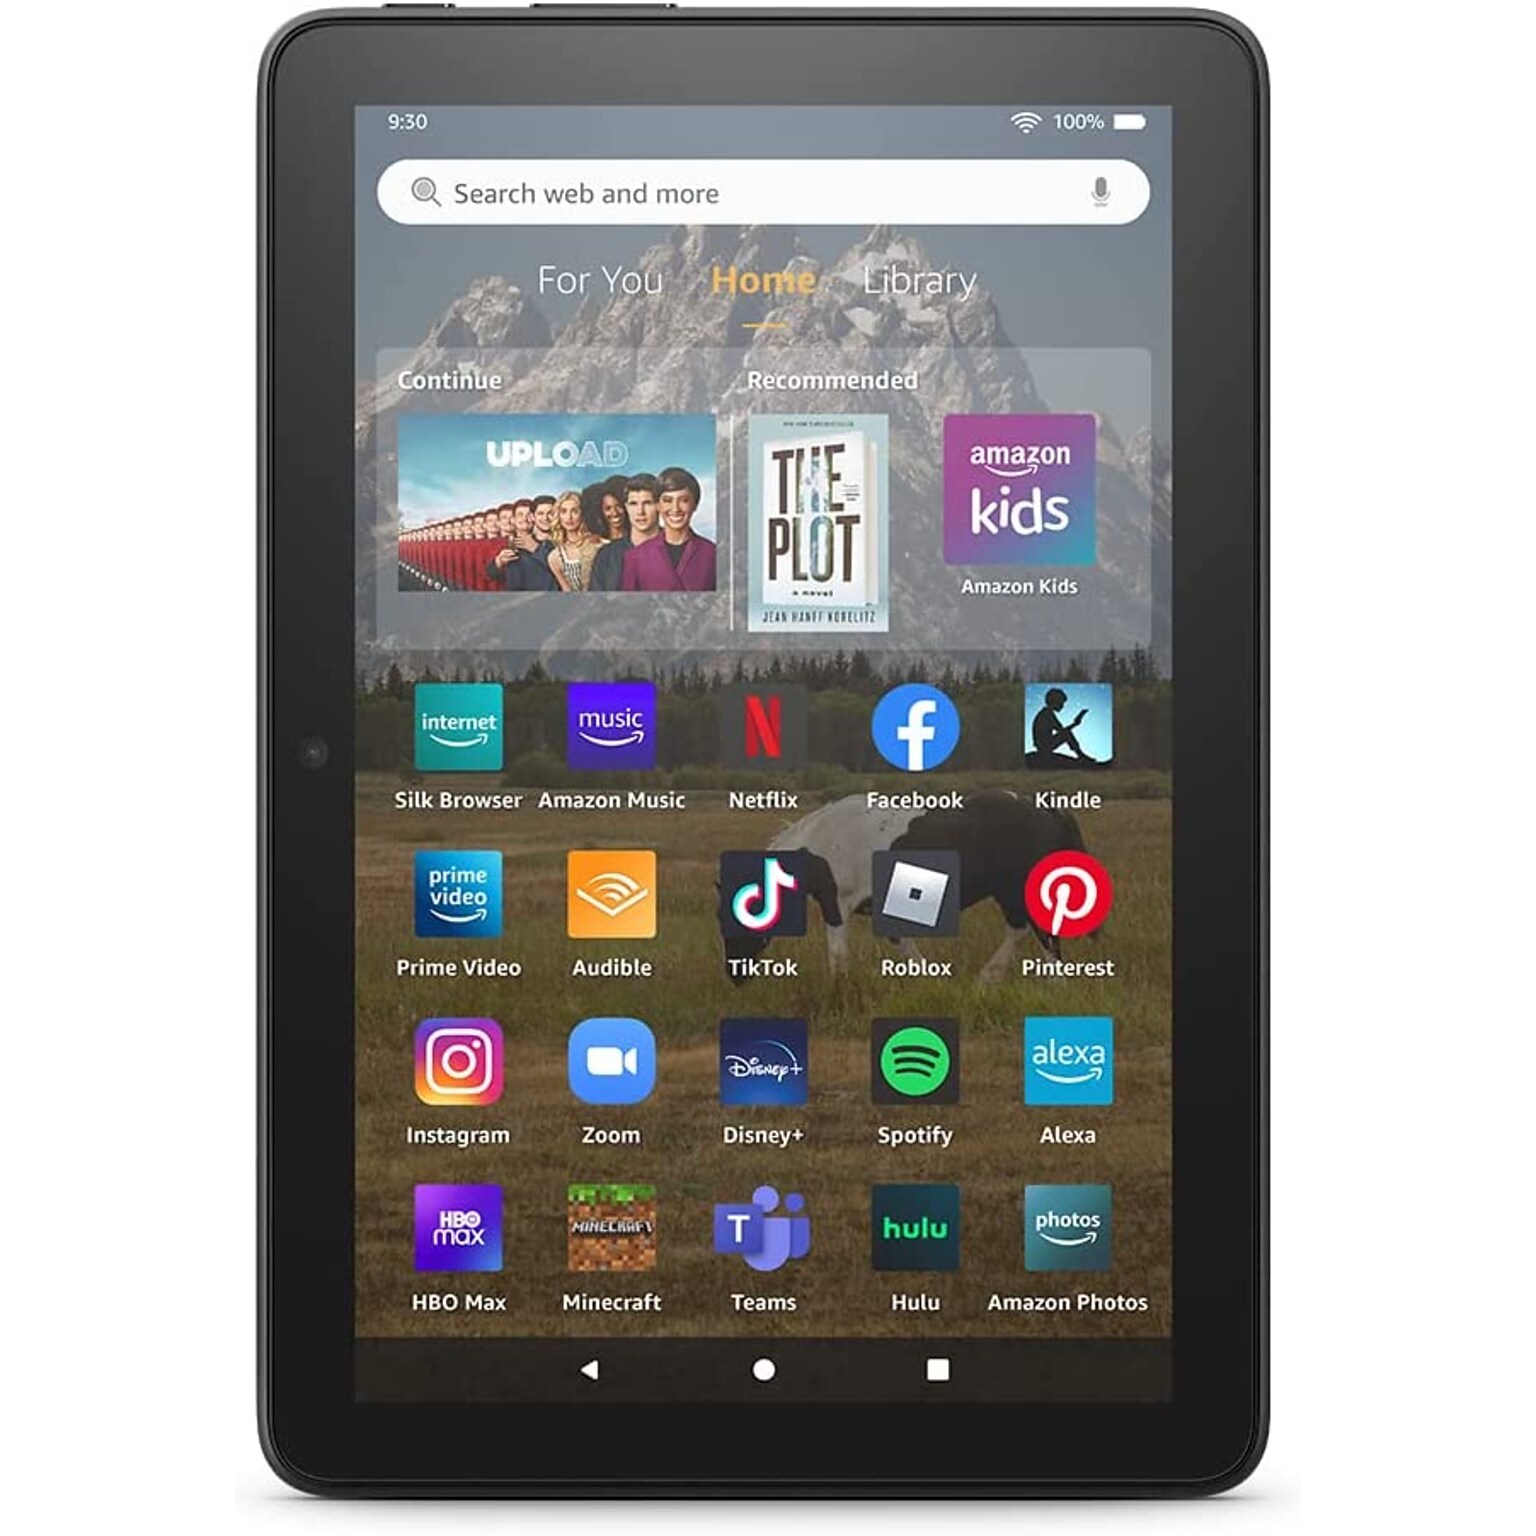 Amazon Fire HD 8, 12th Generation, 8” Tablet, WiFi, 32 GB, Fire OS, Black (B099Z8HLHT)